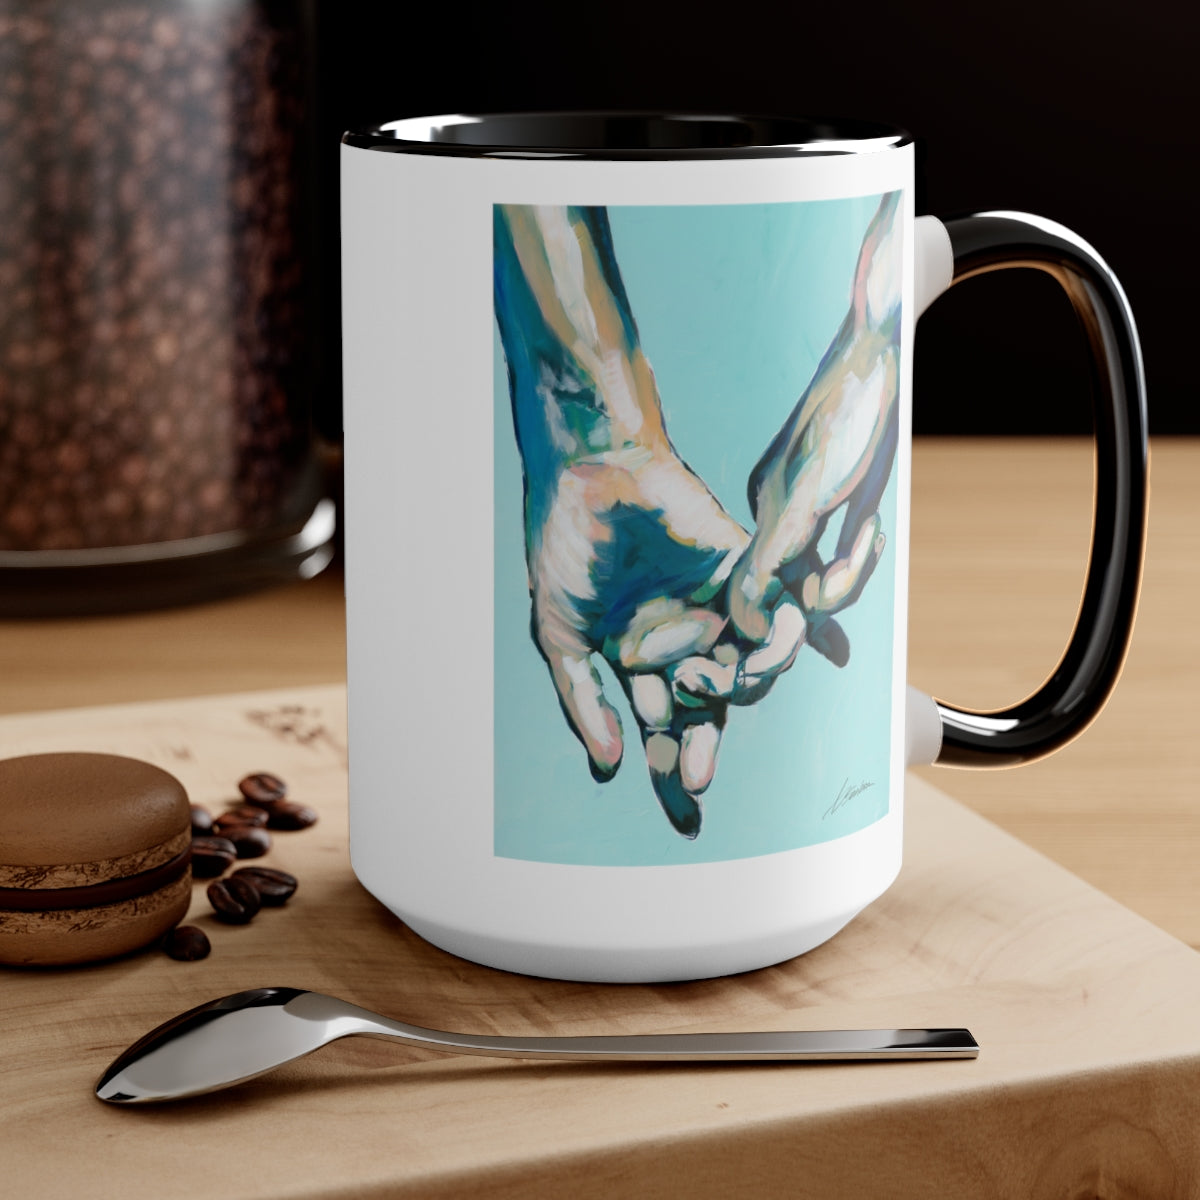 Simple Gesture of Love in Green - Men Holding Hands  - Two-Tone Coffee Mugs, 15oz